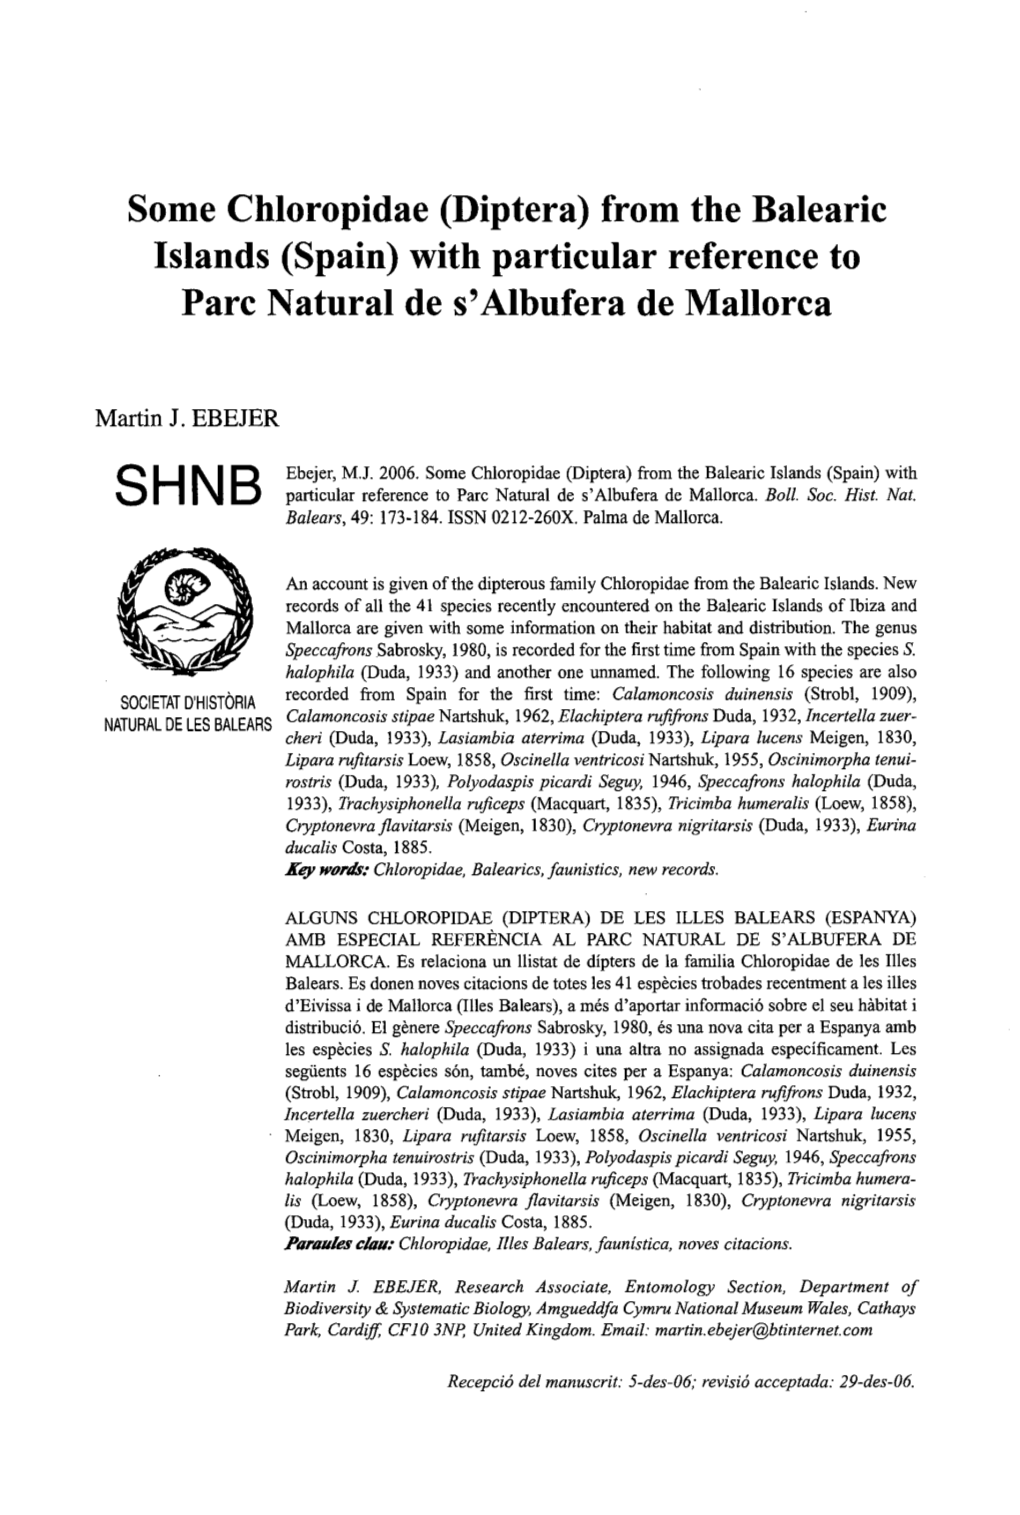 (Diptera) from the Balearic Islands (Spain) with SHNB Particular Reference to Parc Natural De S'albufera De Mallorca